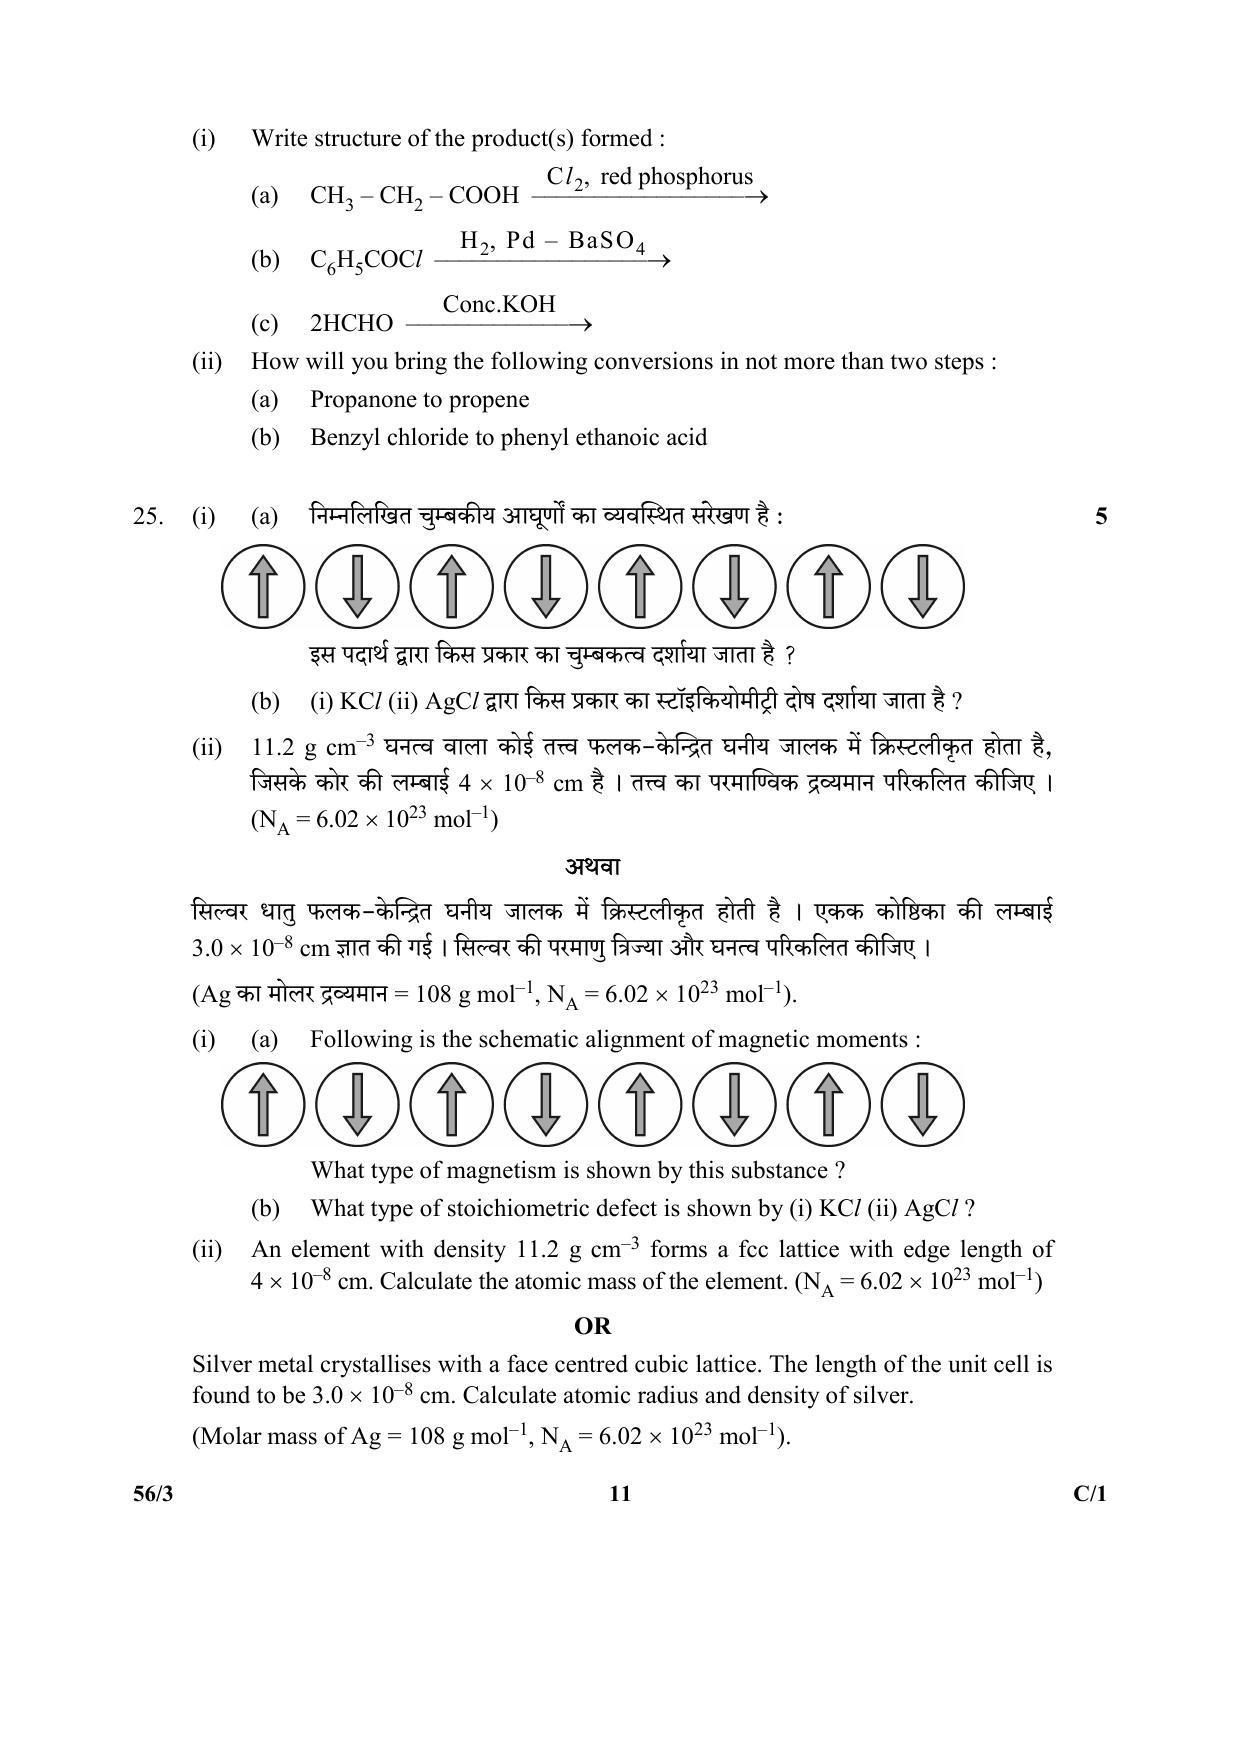 CBSE Class 12 56-3 (Chemistry) 2018 Compartment Question Paper - Page 11